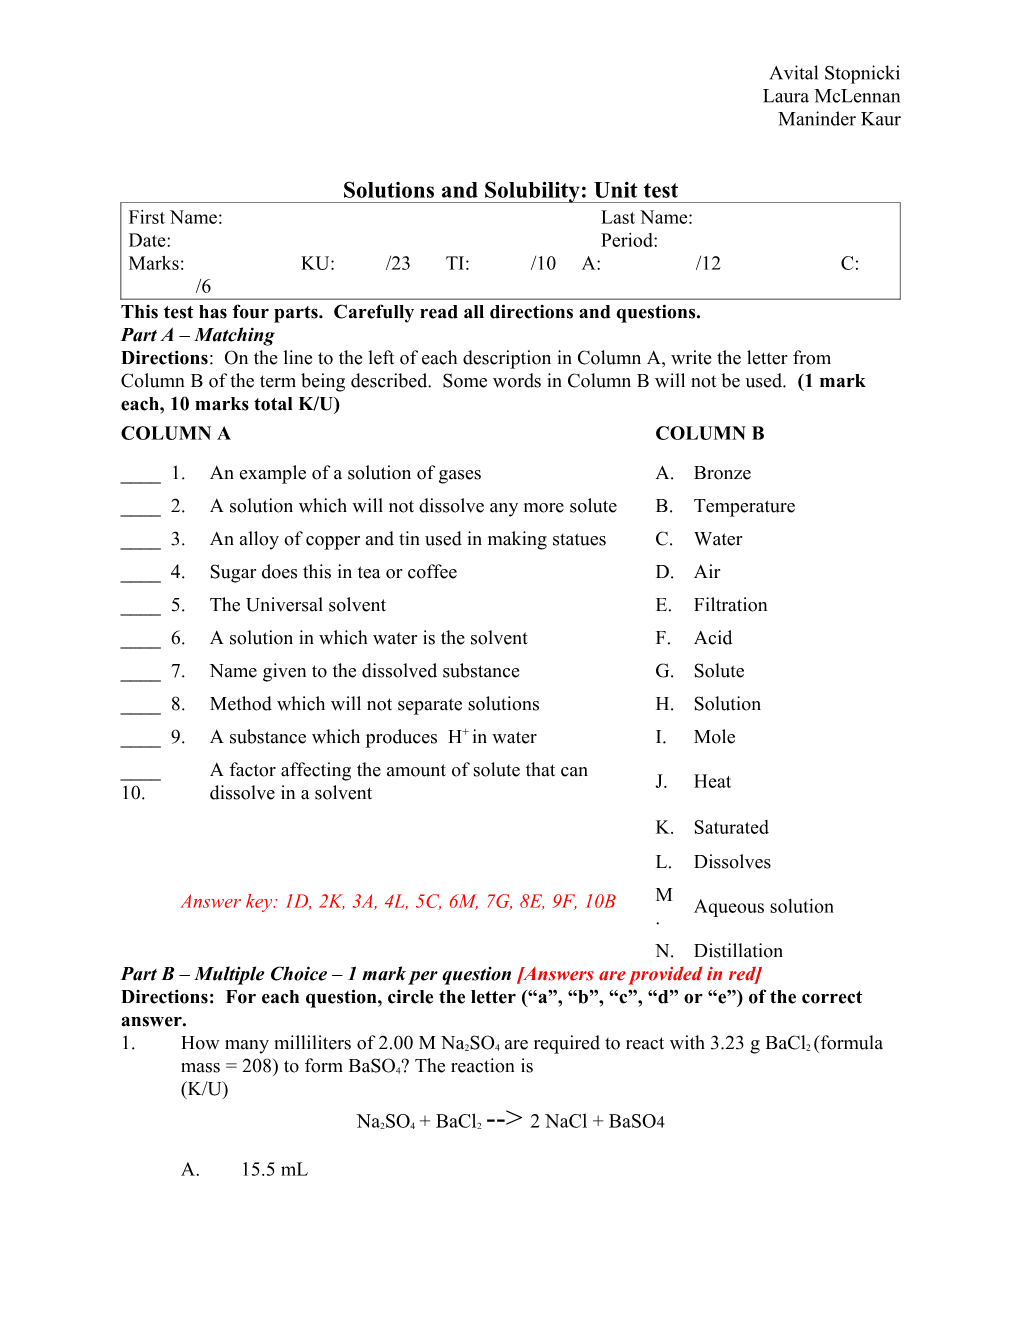 Solutions and Solubility: Unit Test